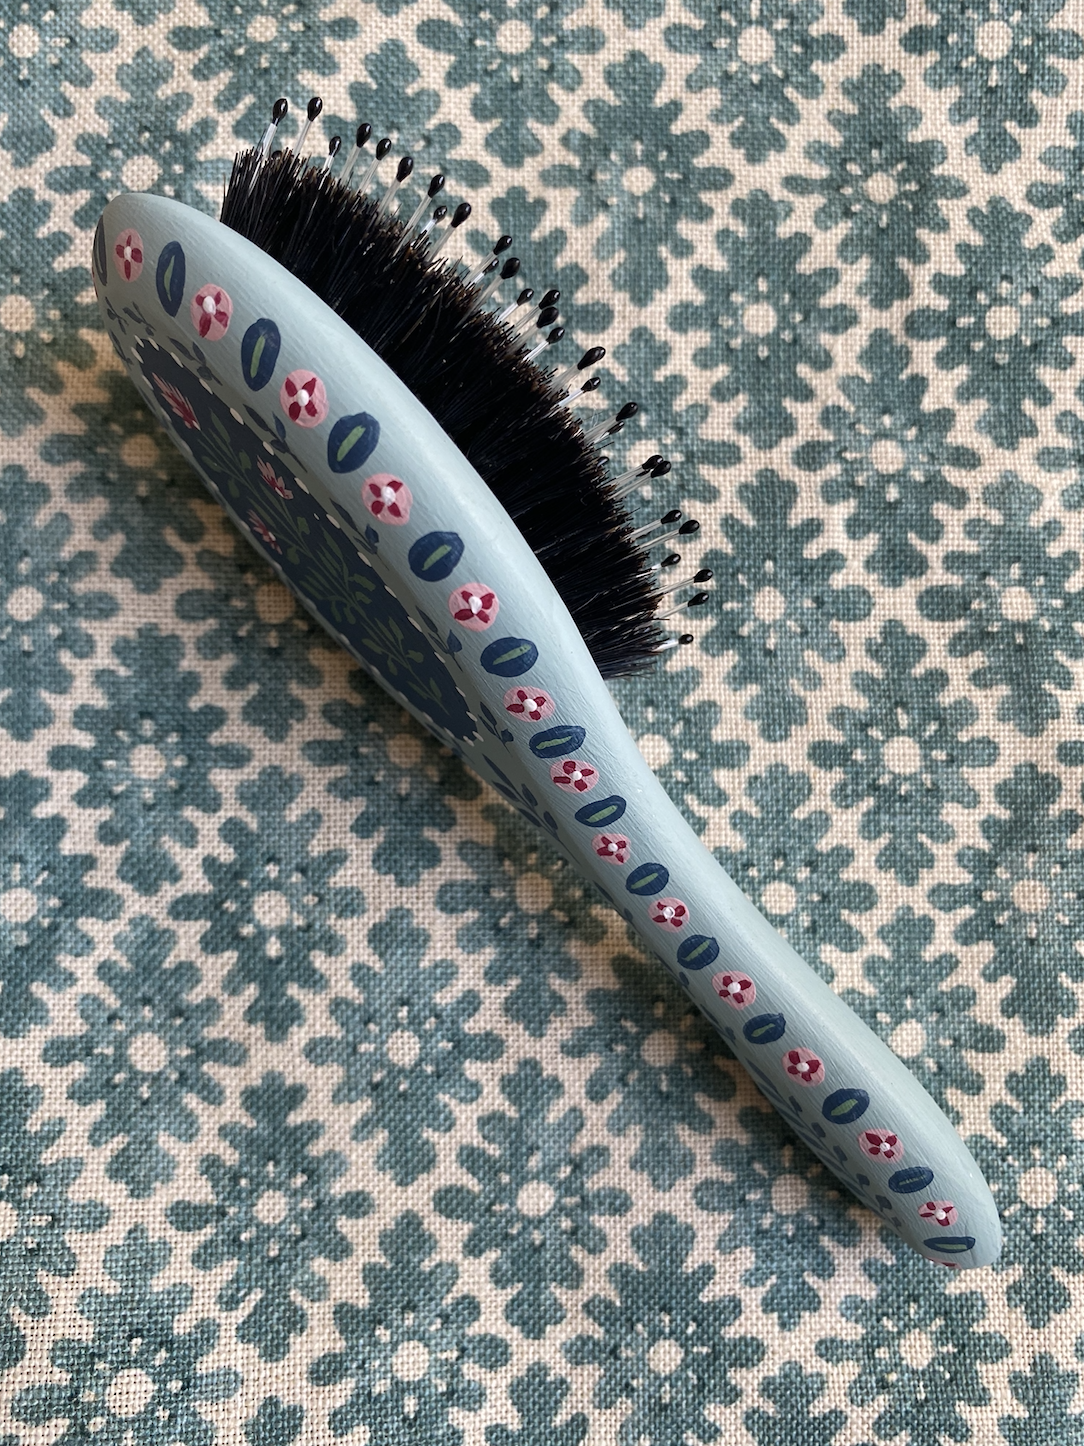 Small hairbrush - Blue with pink flowers